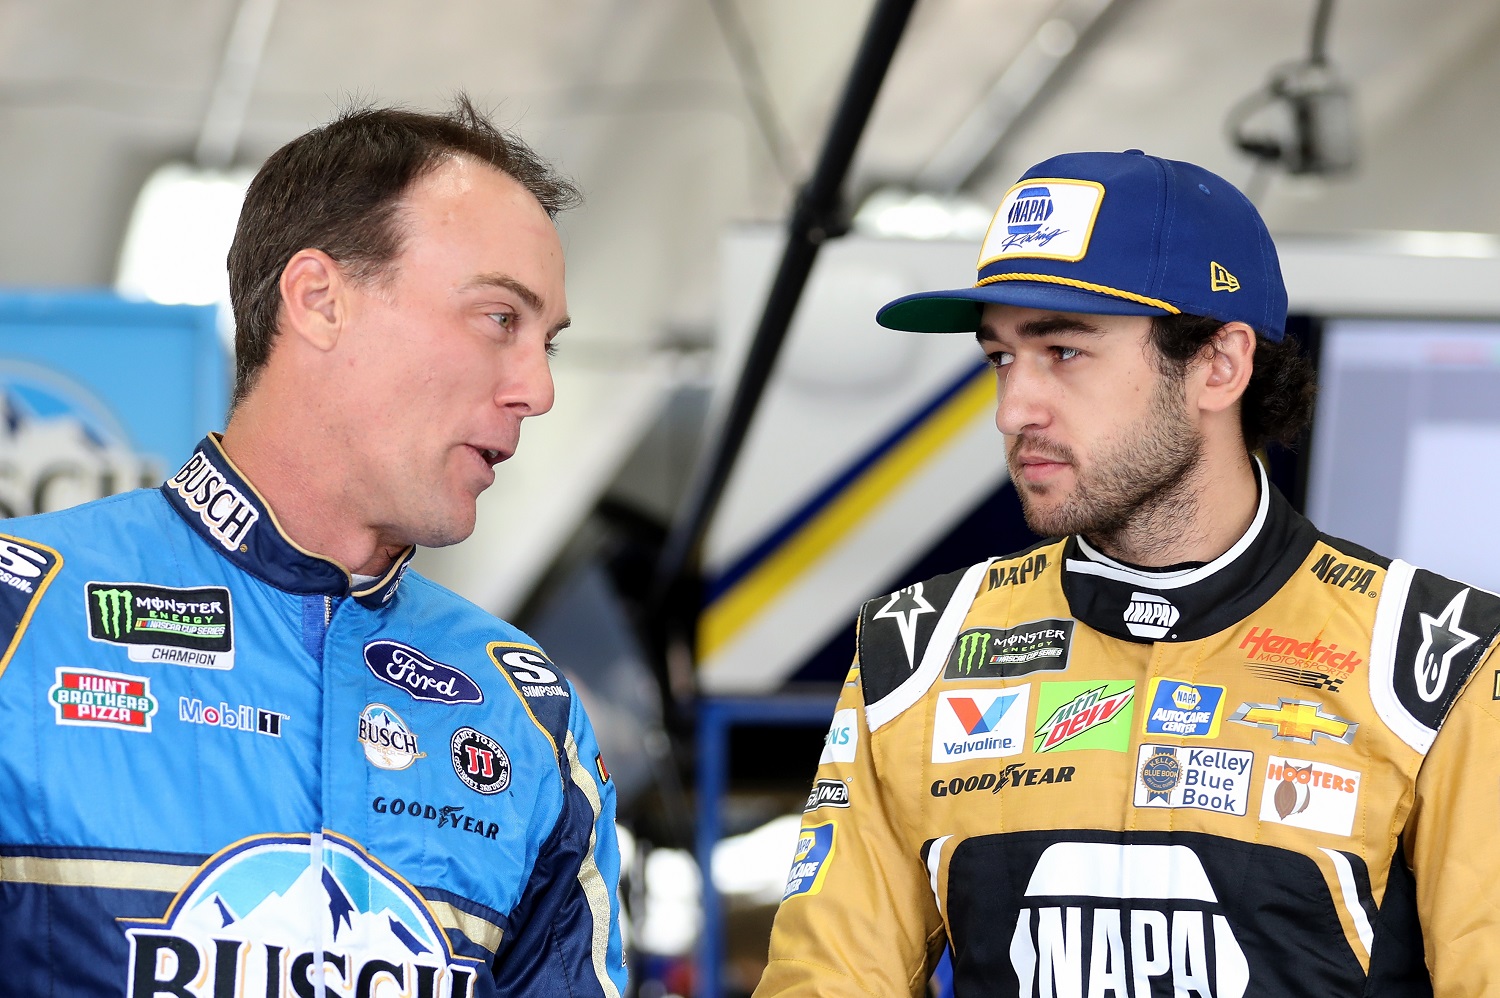 Kevin Harvick and Chase Elliott talk in the garage during practice for the NASCAR All-Star Race at Charlotte Motor Speedway on May 17, 2019.